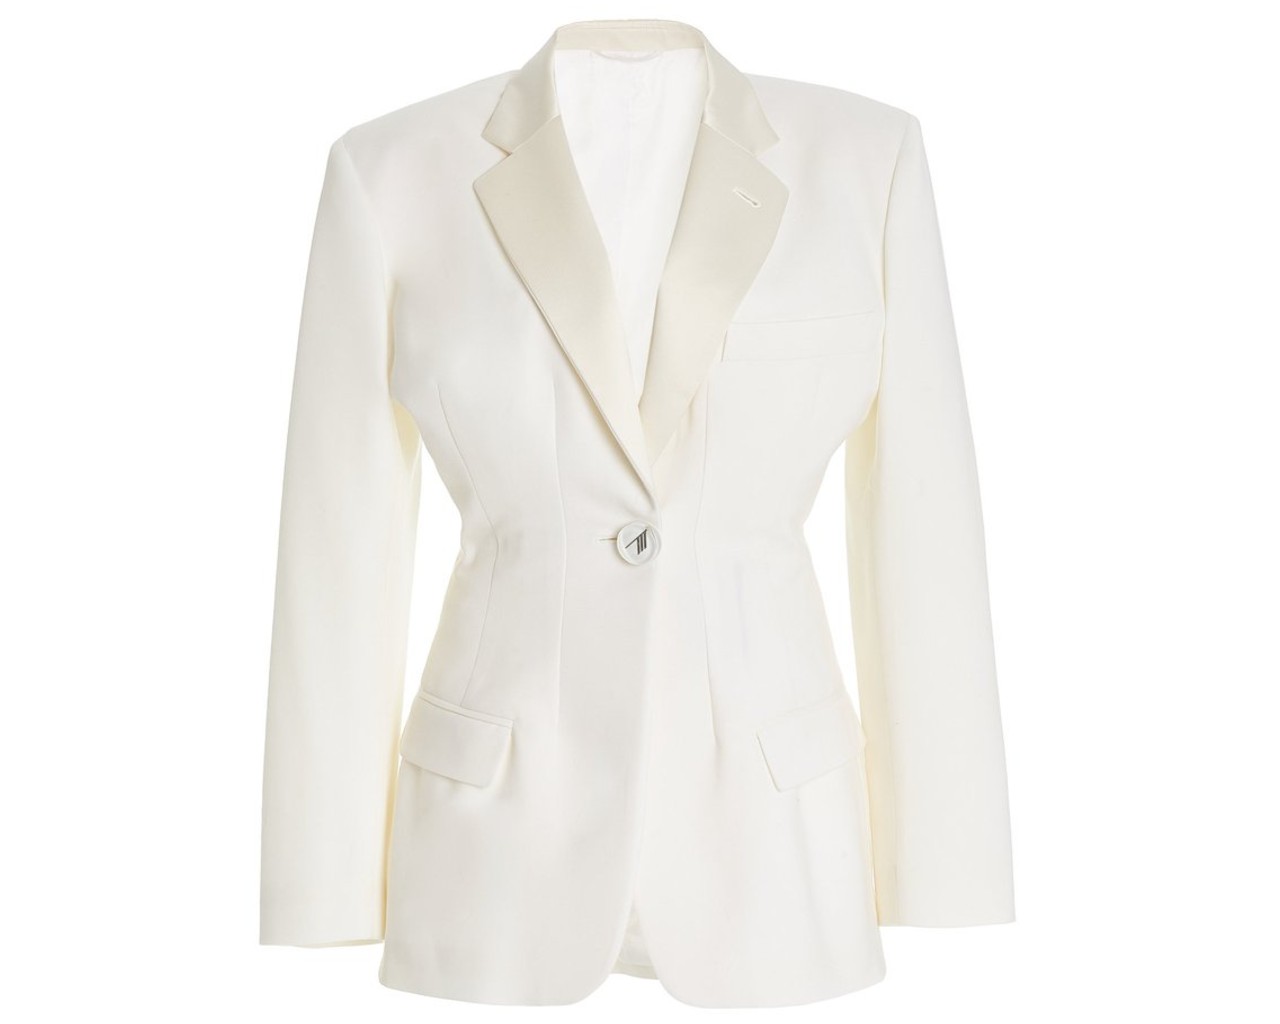 Attico stretch blazer, inspired by the suffragette suit Kamala Harris wore during victory speech